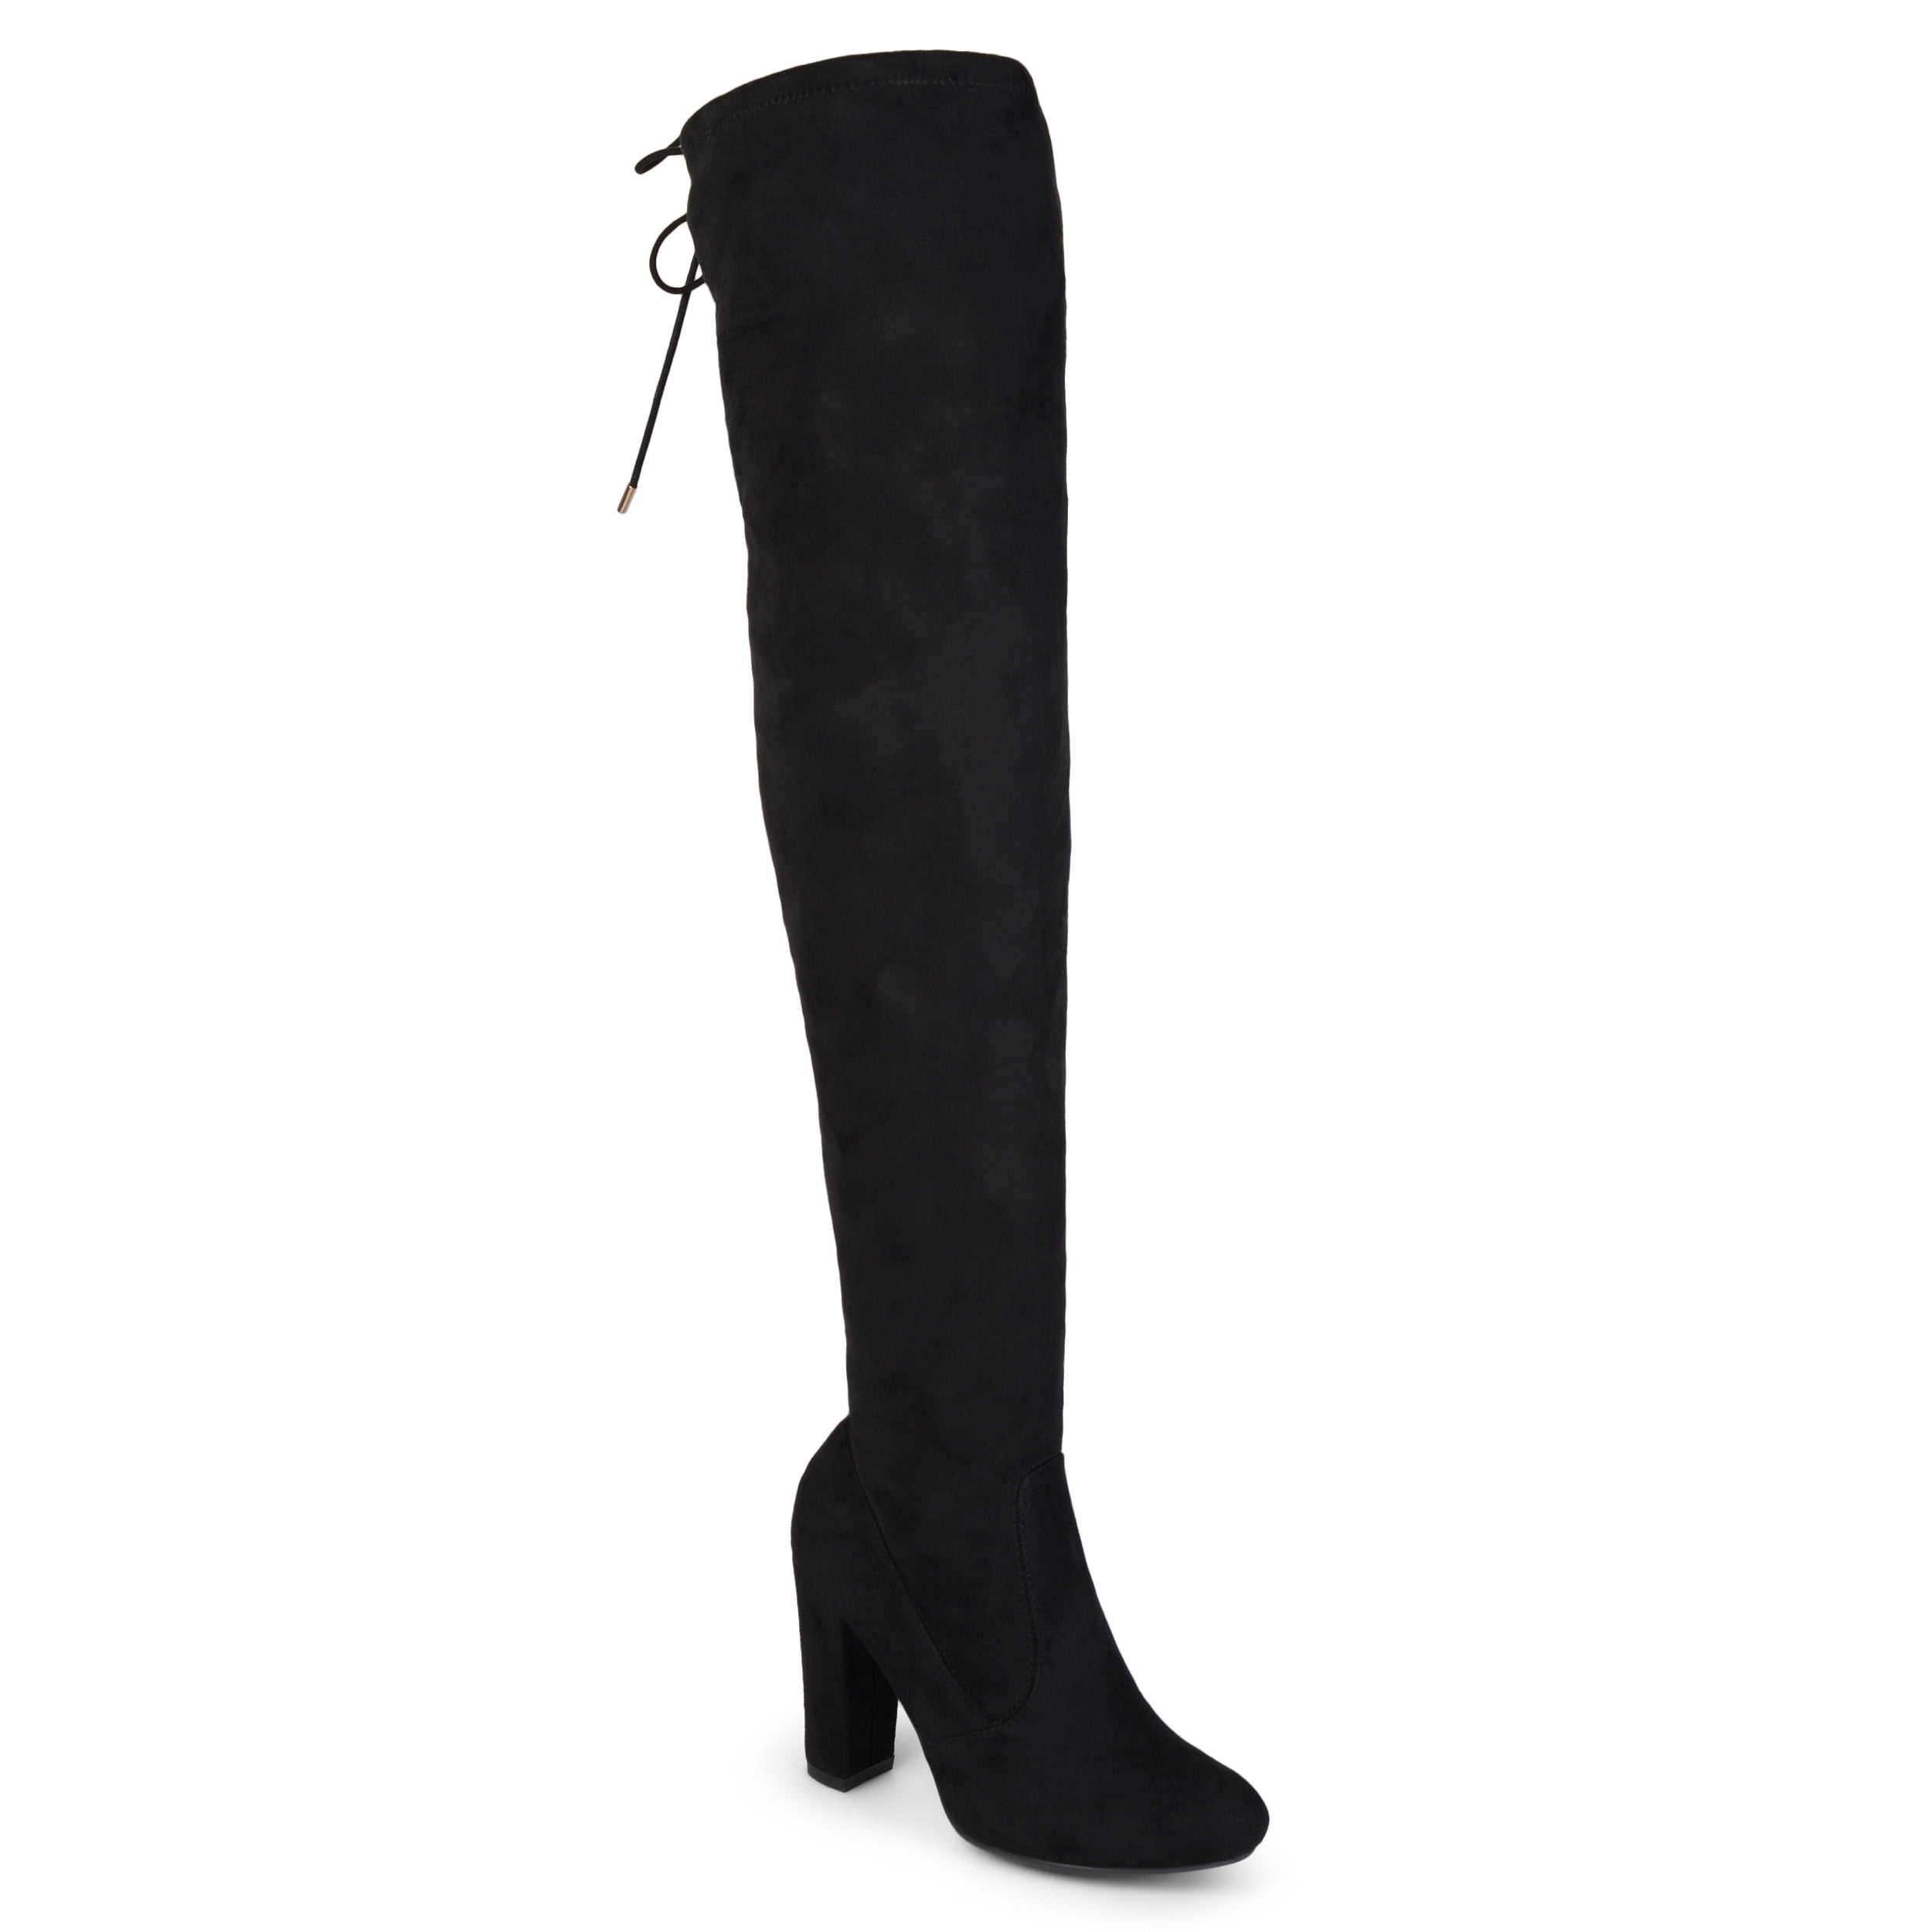 Cambridge Select Womens Slouchy Fold-Over Cuff Thigh-High Over The Knee Low Heel Boot